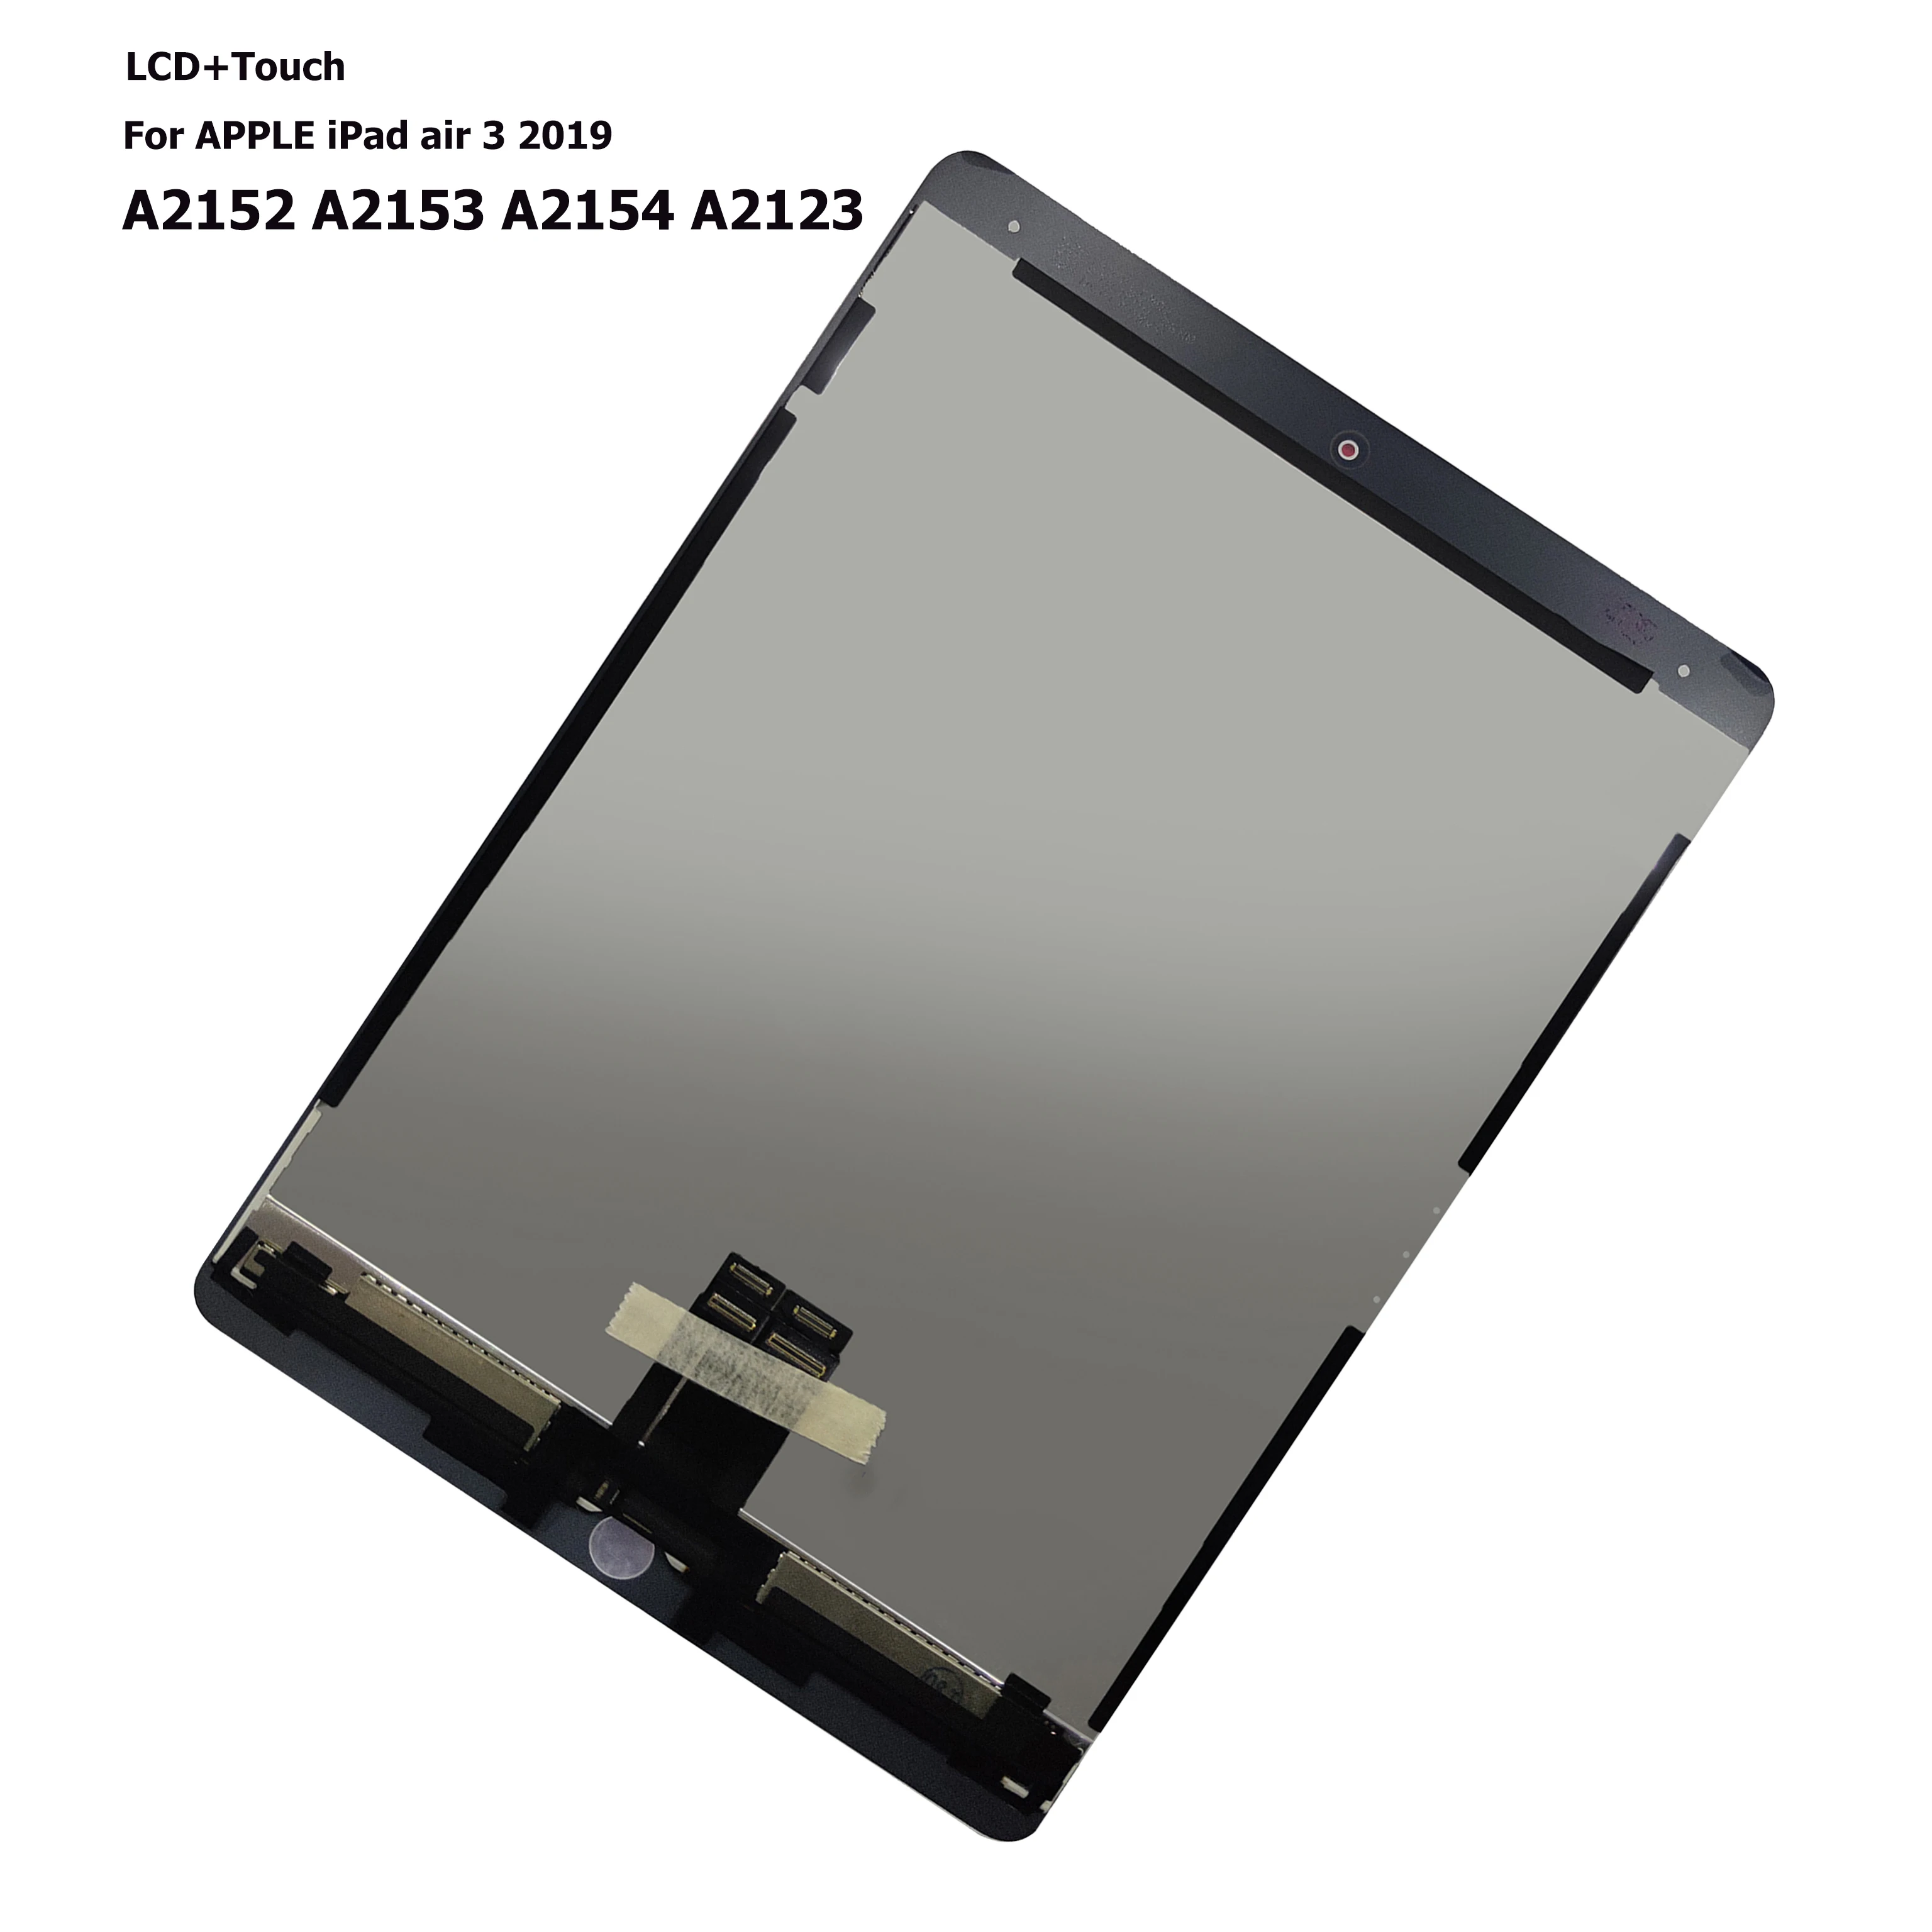 New` LCD For iPad Air 3 2019 A2152 A2123 A2153 A2154 Display Touch Screen Digitizer Assembly LCD For iPad Pro 10.5 2nd Gen